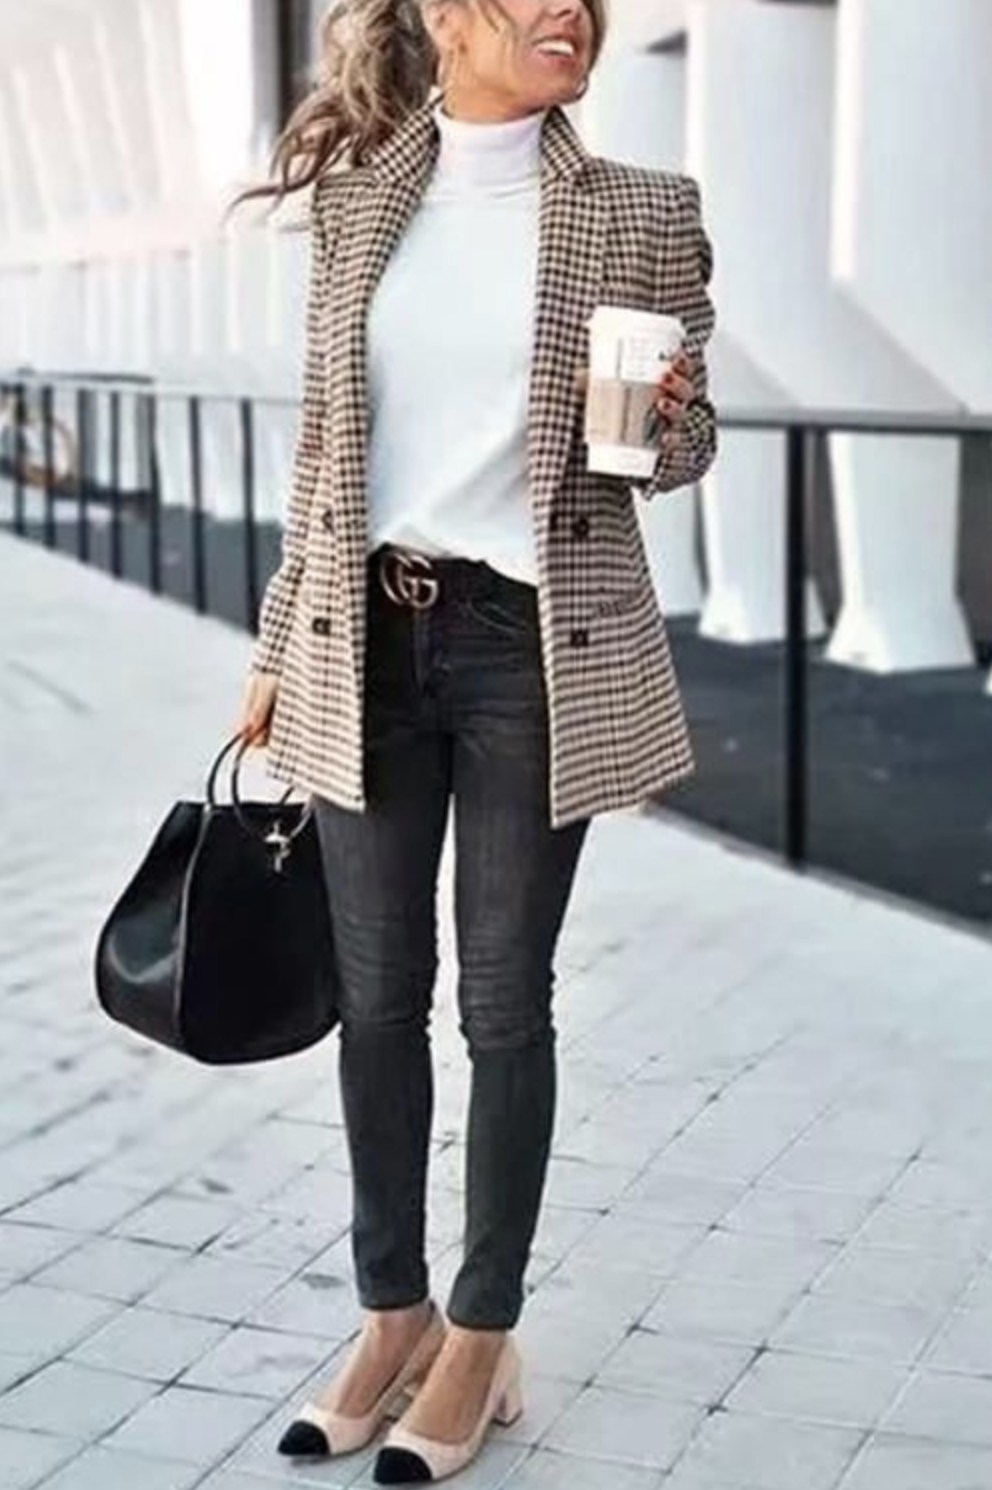 Best Labor Day Sales 2019 for Fall Clothing - An Unblurred Lady - Best Labor Day Sales 2019 for Fall Clothing - An Unblurred Lady -   style 2019 women